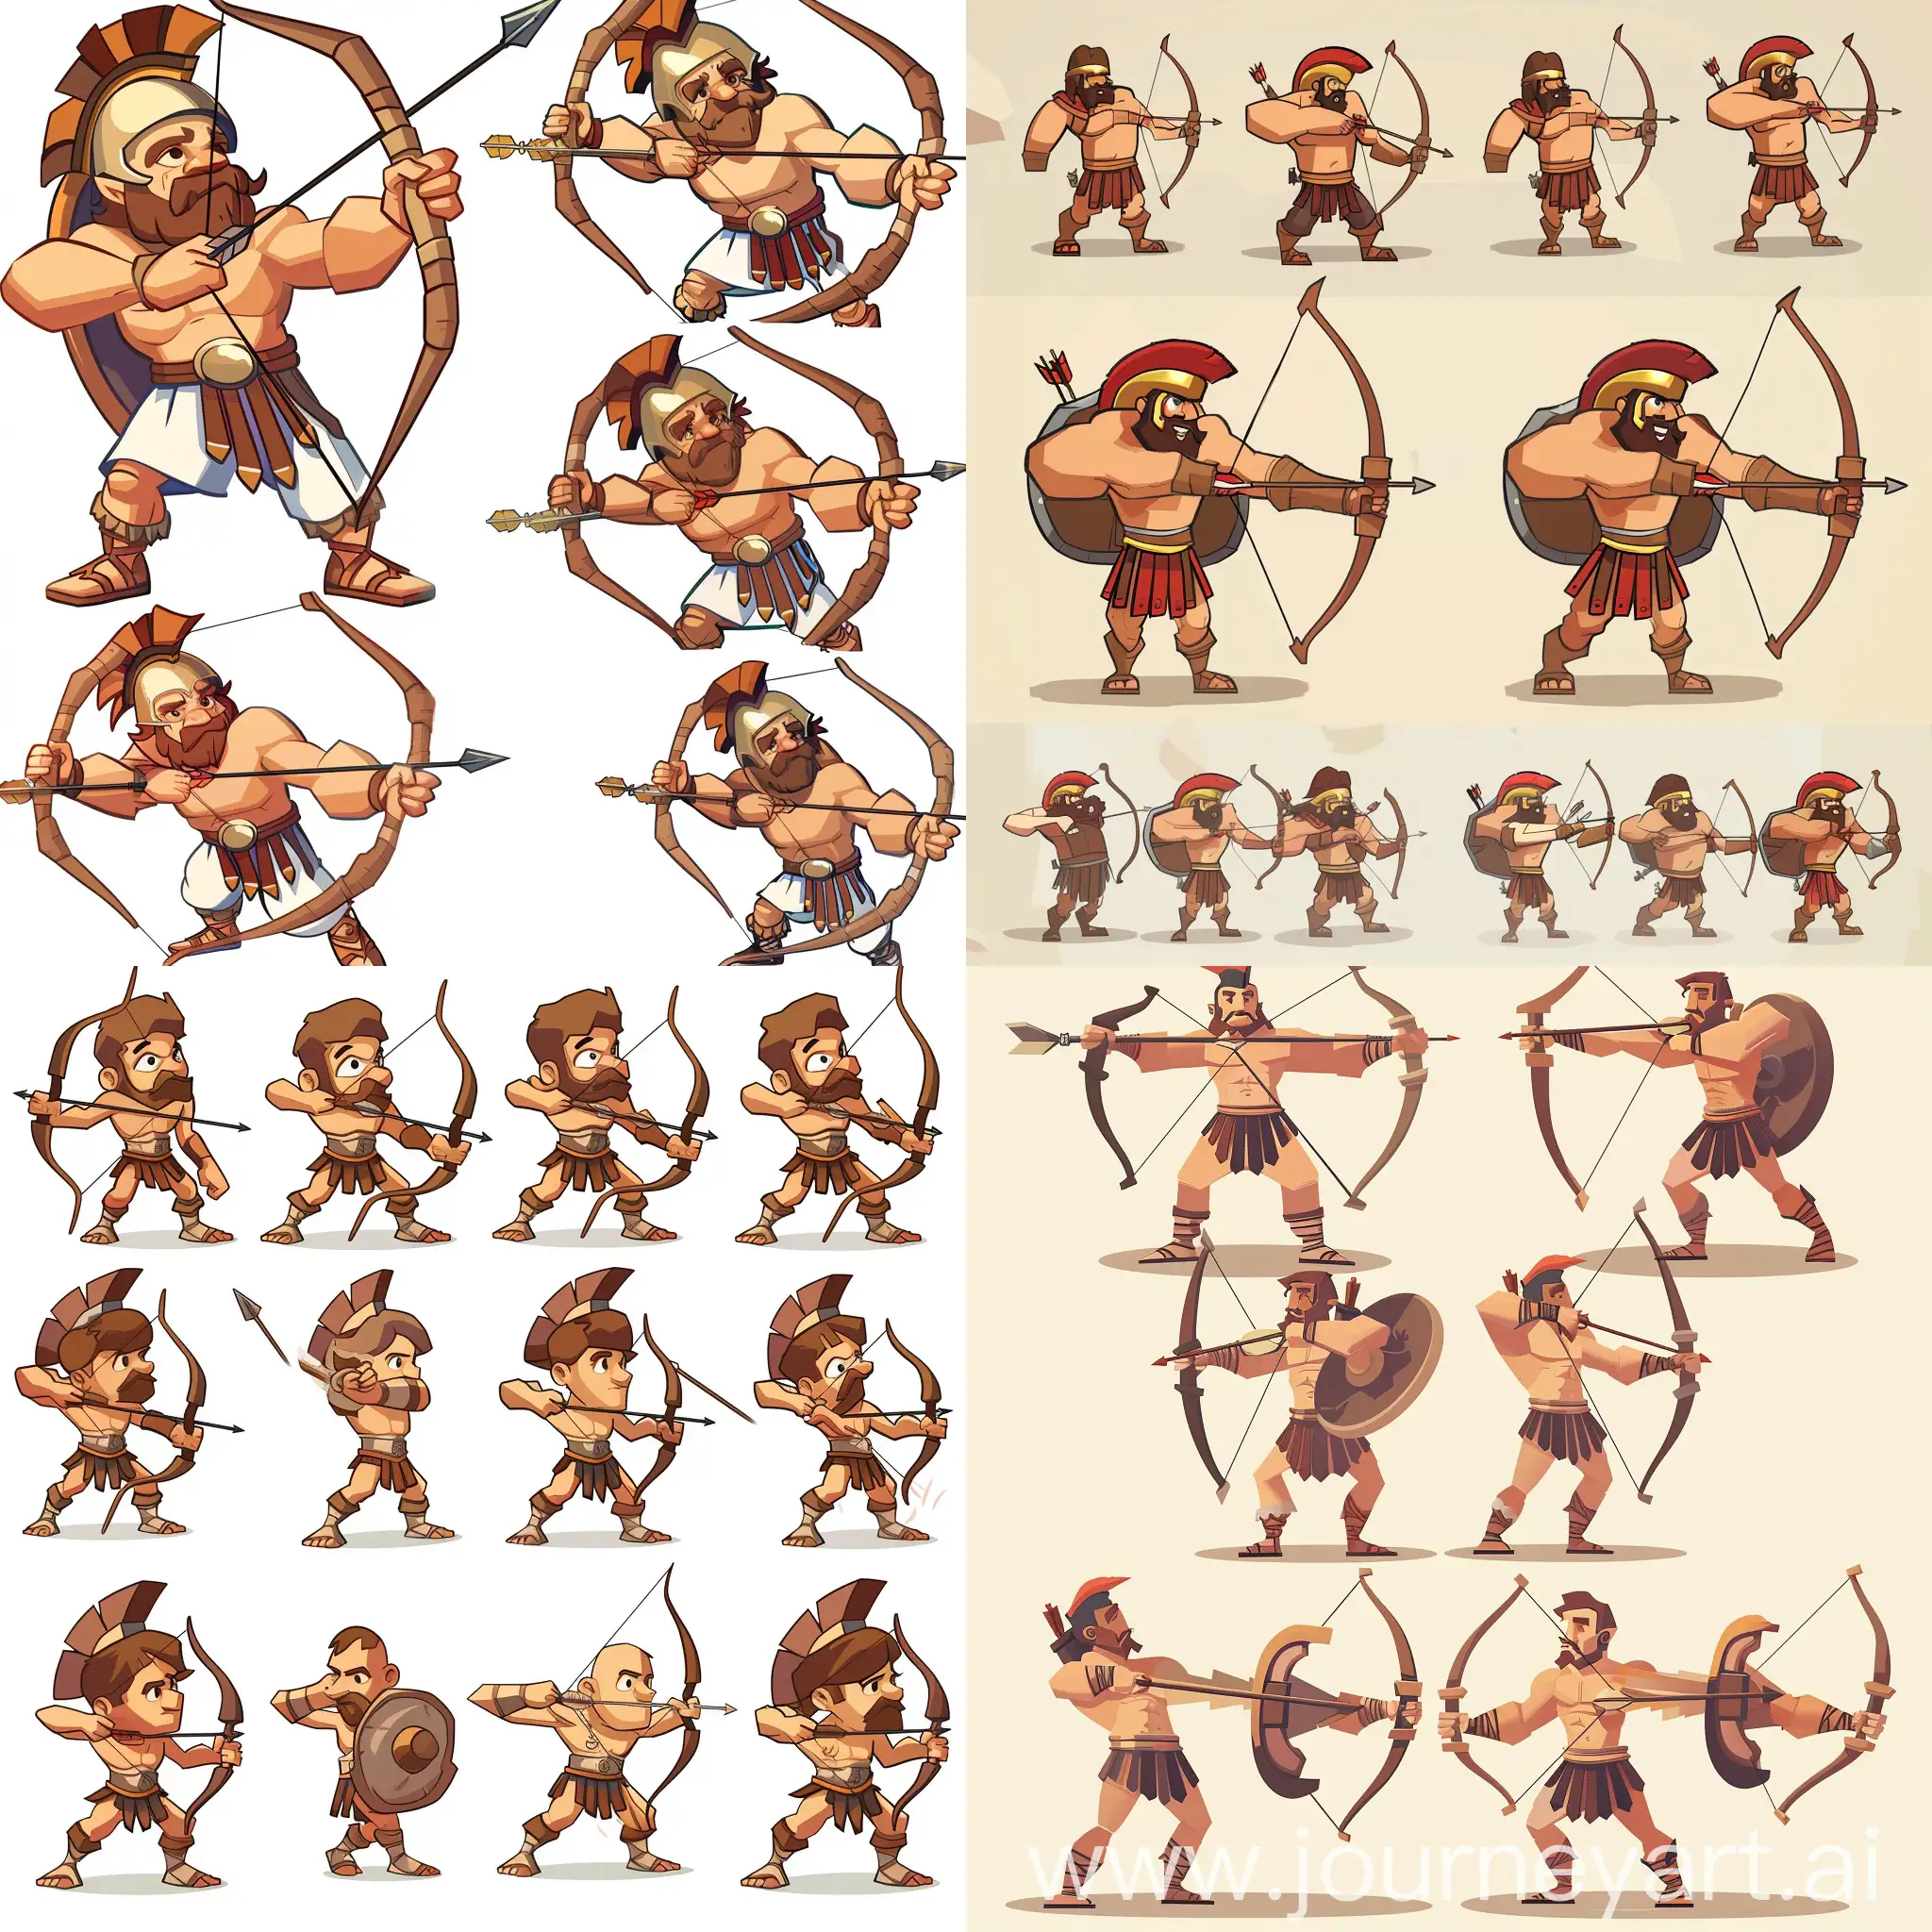 Create a sprite sheet for a greek archer, make the character look like a clash royale character, Make the sprite sheet have a top-down perspective of the character like a rpg, include movements like going forwards and backwards and attacks